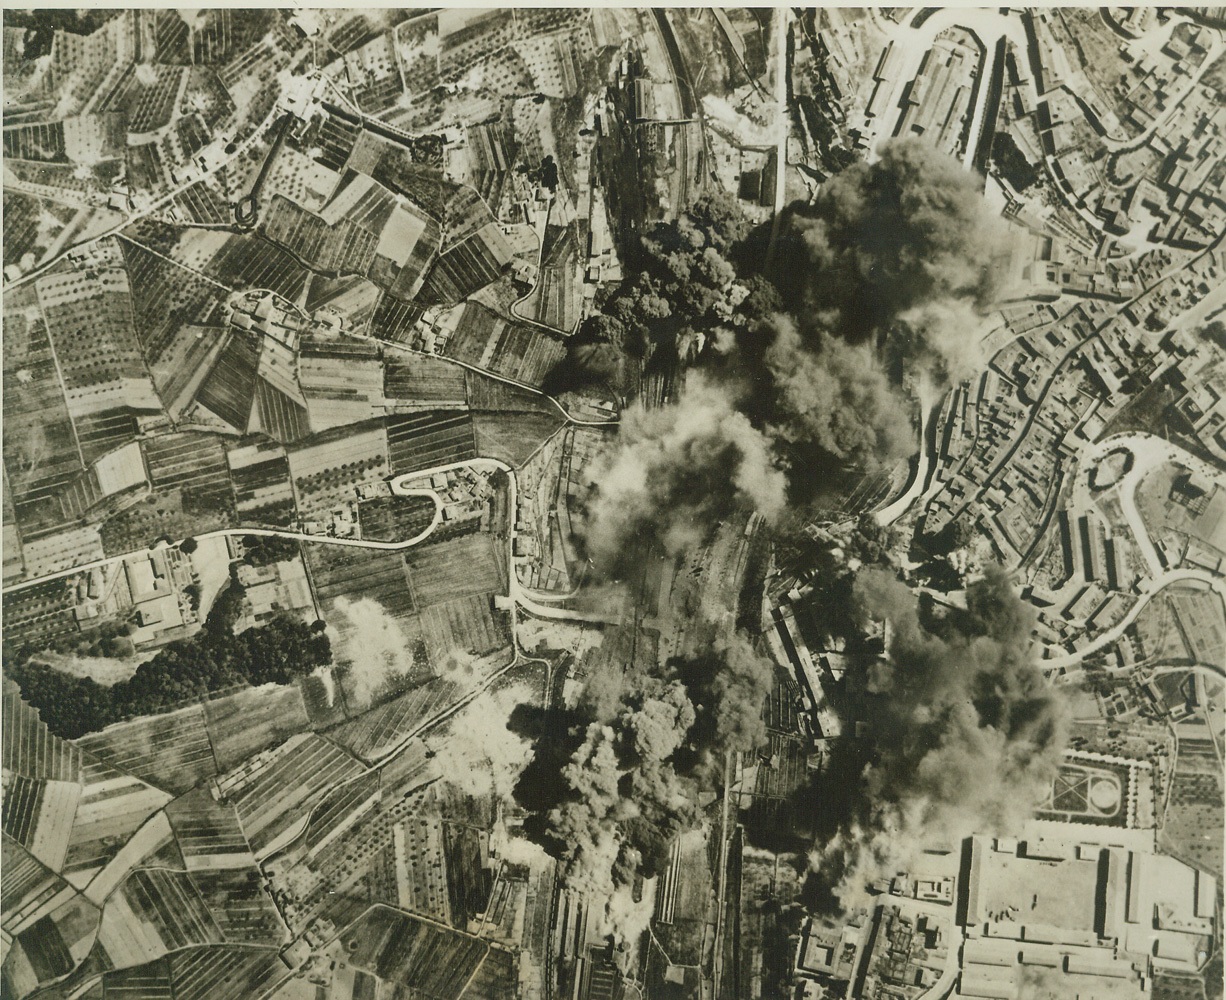 Ploesti Smashed Again by U.S. Airmen, 5/6/1944. PLOESTI, ROMANIA—Stepping up their non-stop pace in air offense, the Allies again hit the railroad marshalling yards at Ploesti and here Allied bombers wing over their target, leaving explosions and fires in their wake. The Flying Forts, based in Italy, were playing an early return engagement on the oil center which they attacked heavily not long ago. It appears that the Allies’ aim is to cripple German transportation and supply facilities as much as possible before the dawn of “D” day.  Credit: OFFICIAL AAF PHOTO FROM ACME.;